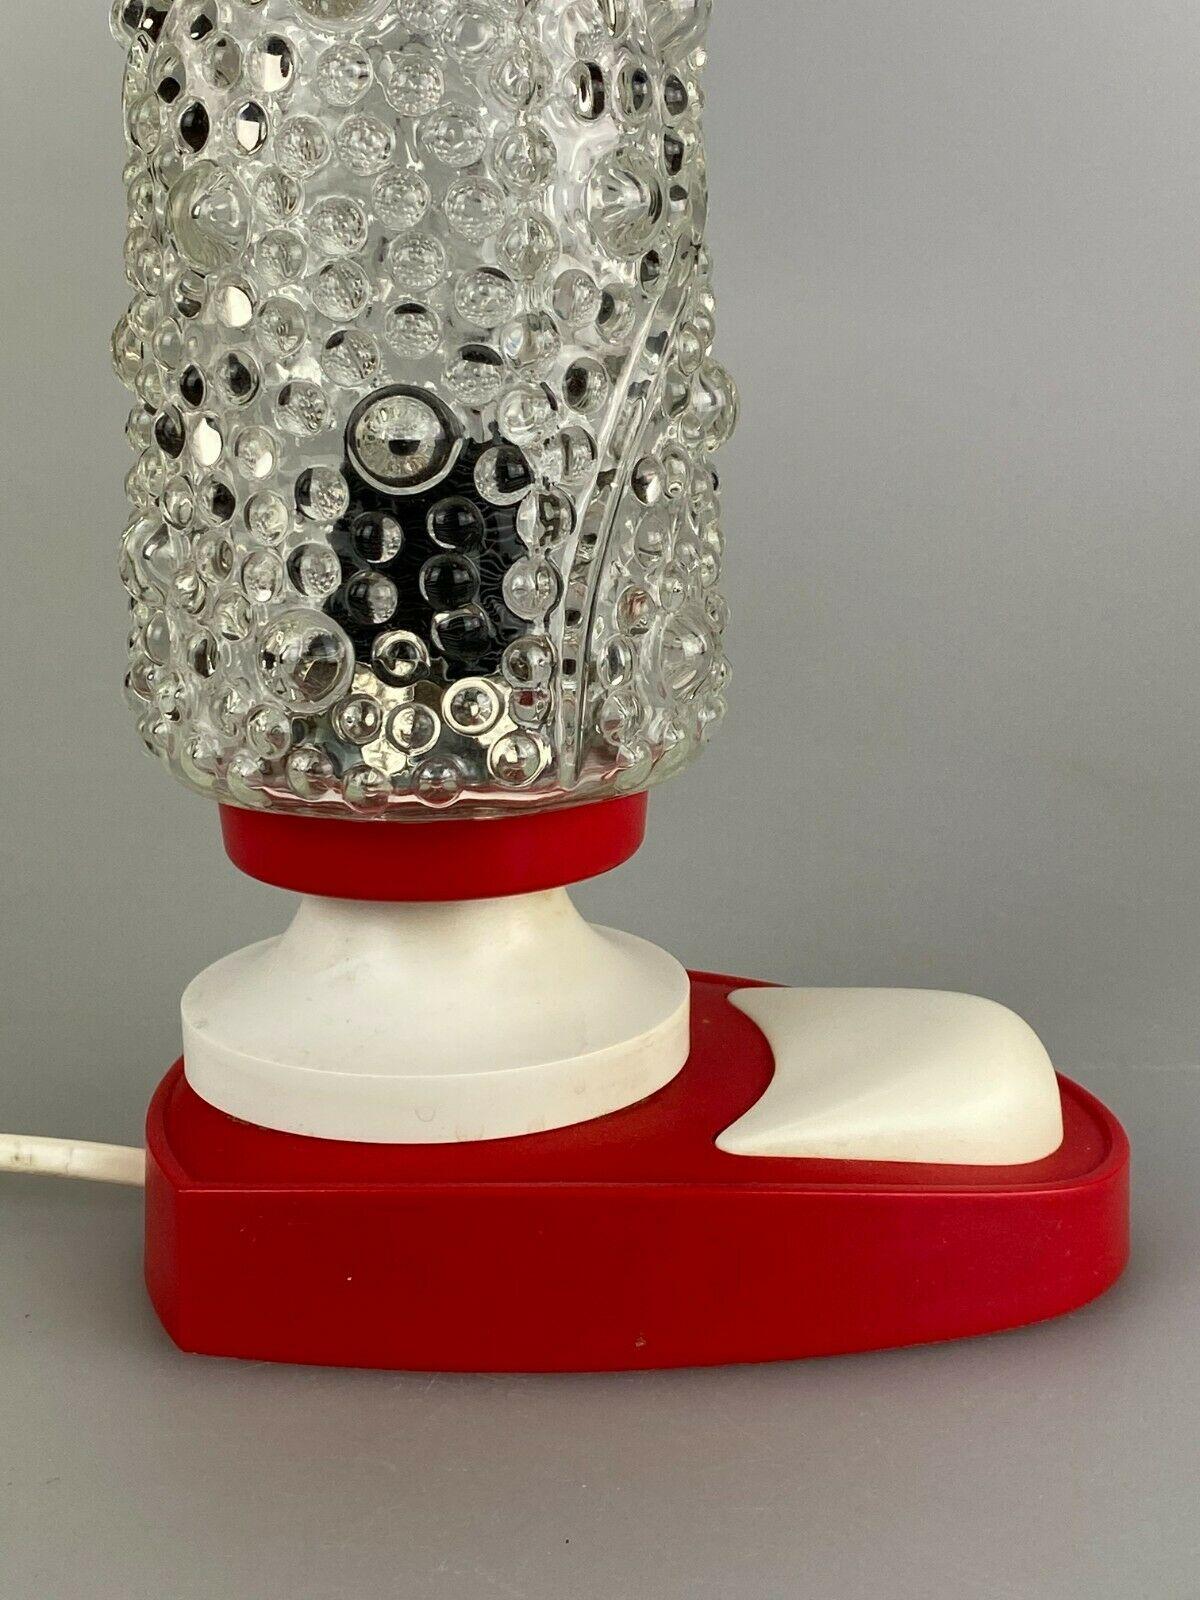 60s 70s Lamp Bubble Light Table Lamp Bedside Lamp Space Age Design In Good Condition For Sale In Neuenkirchen, NI